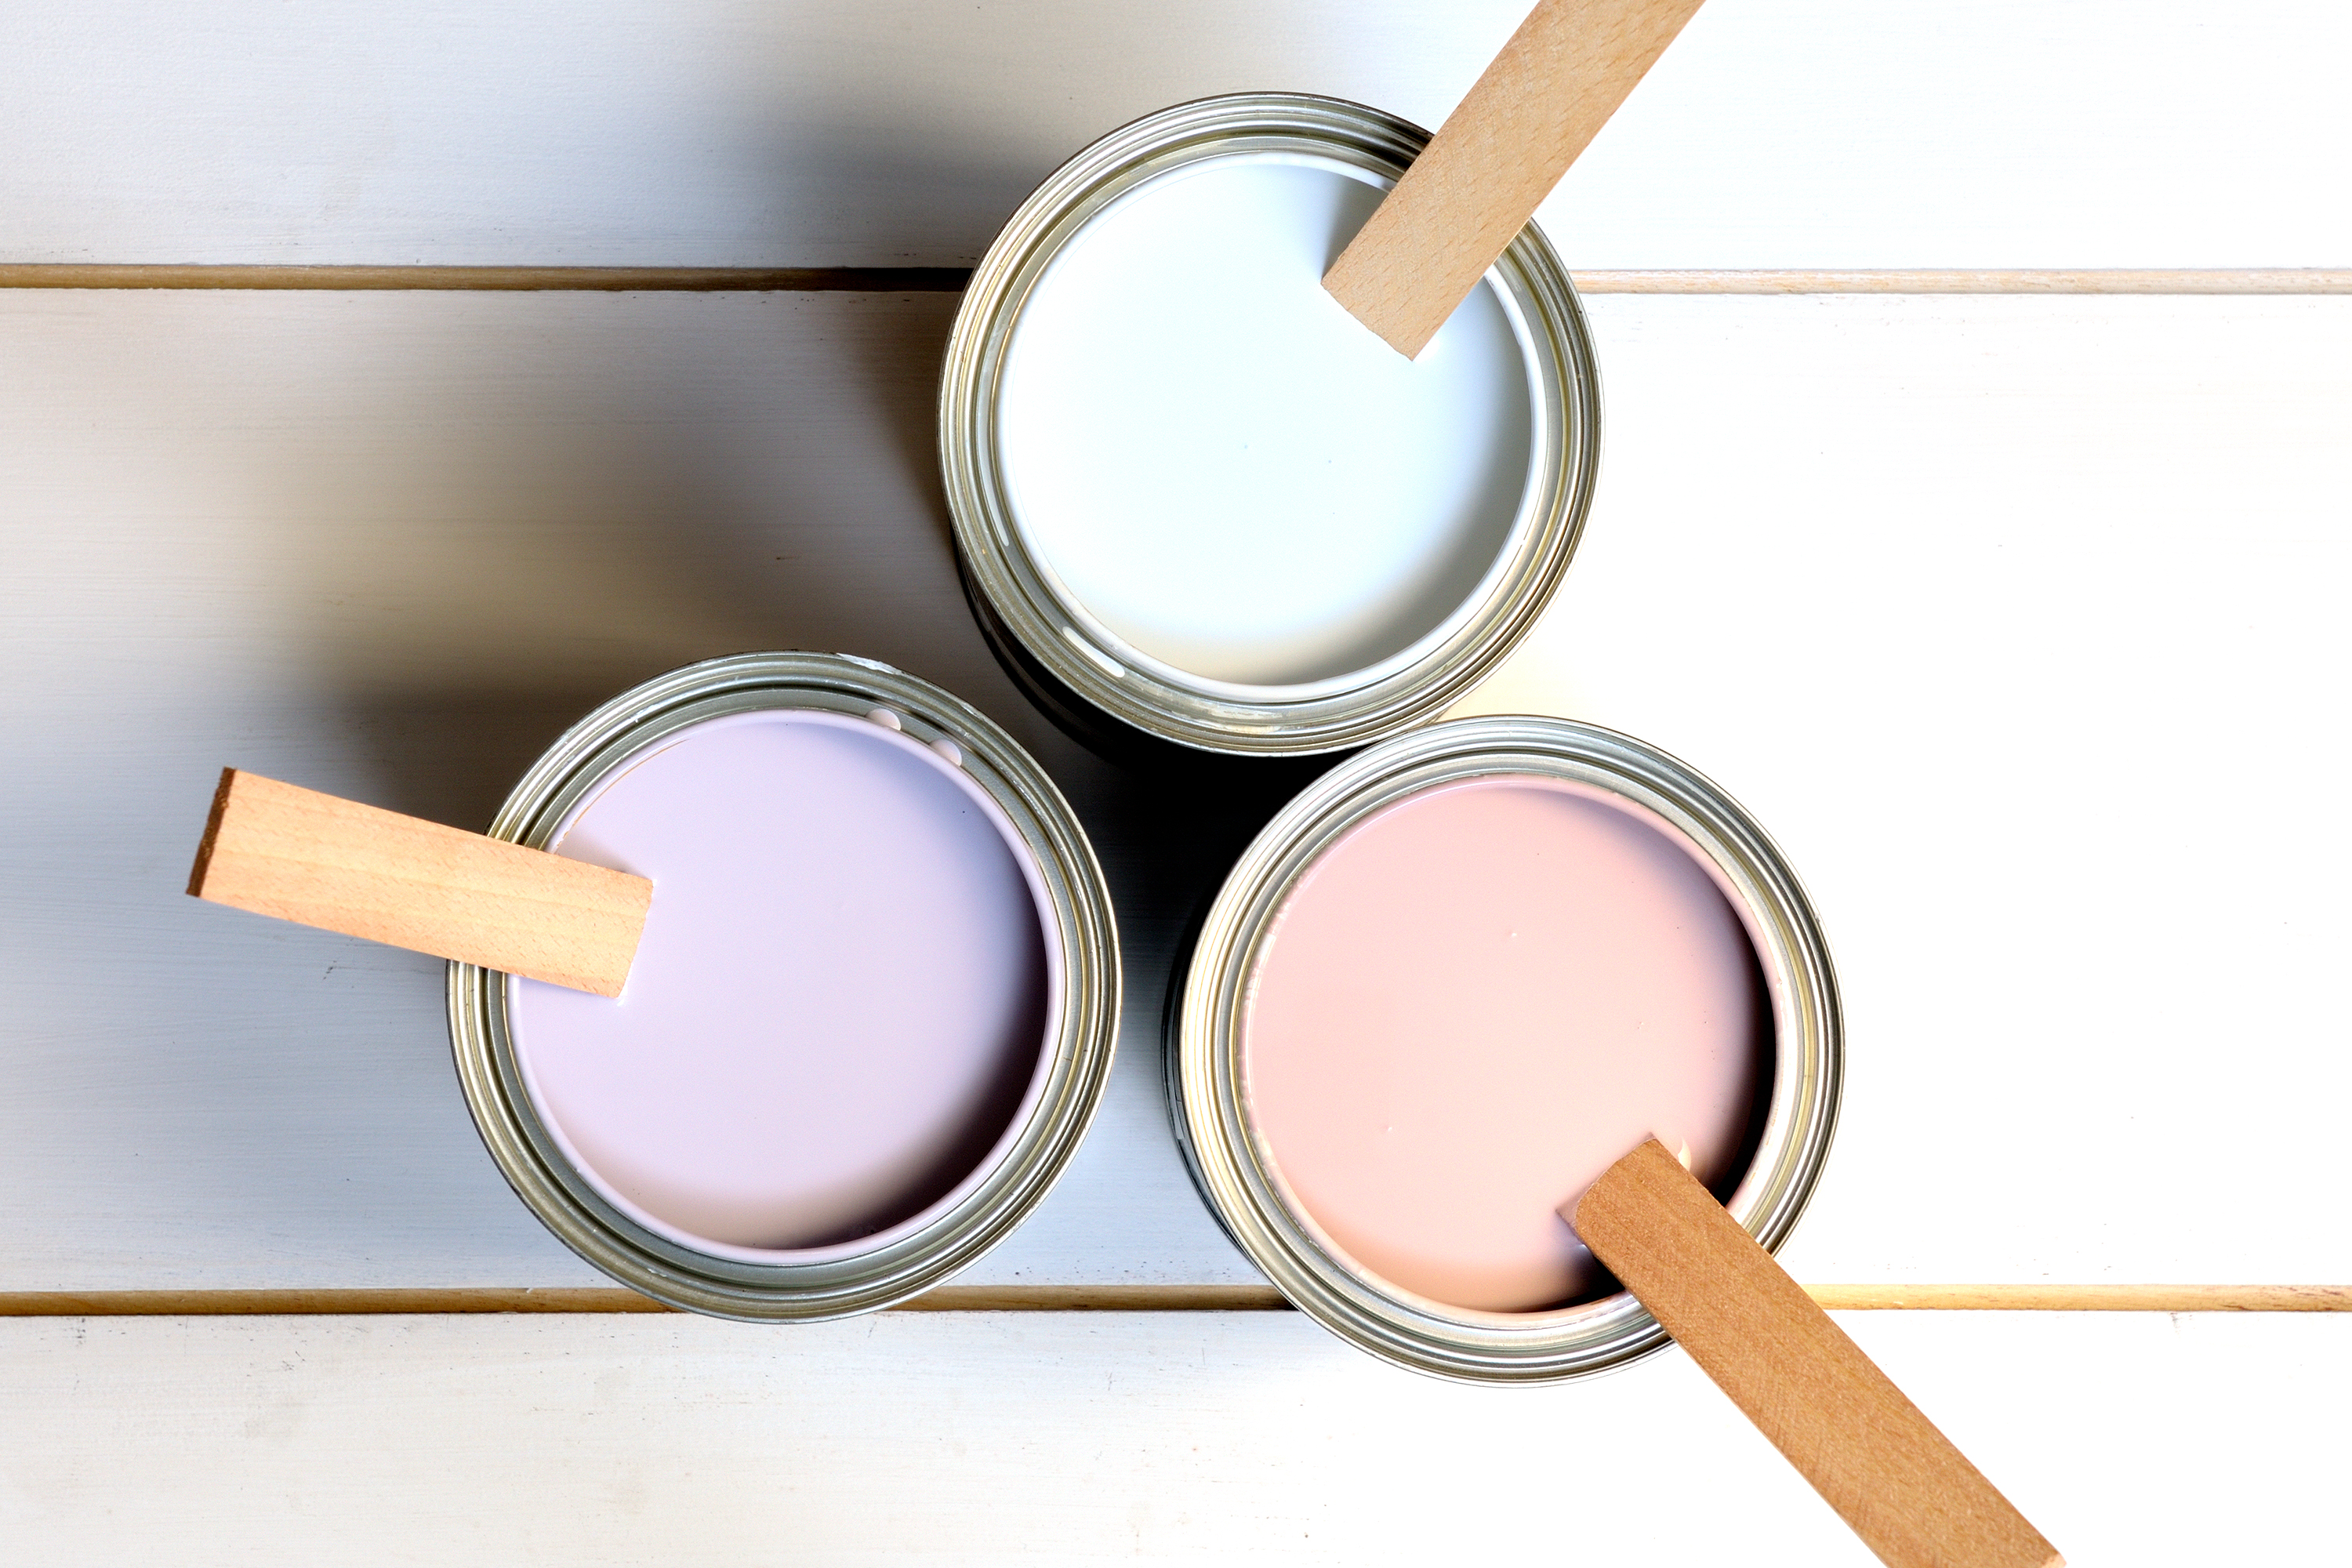 Cans of paint with mixing sticks.